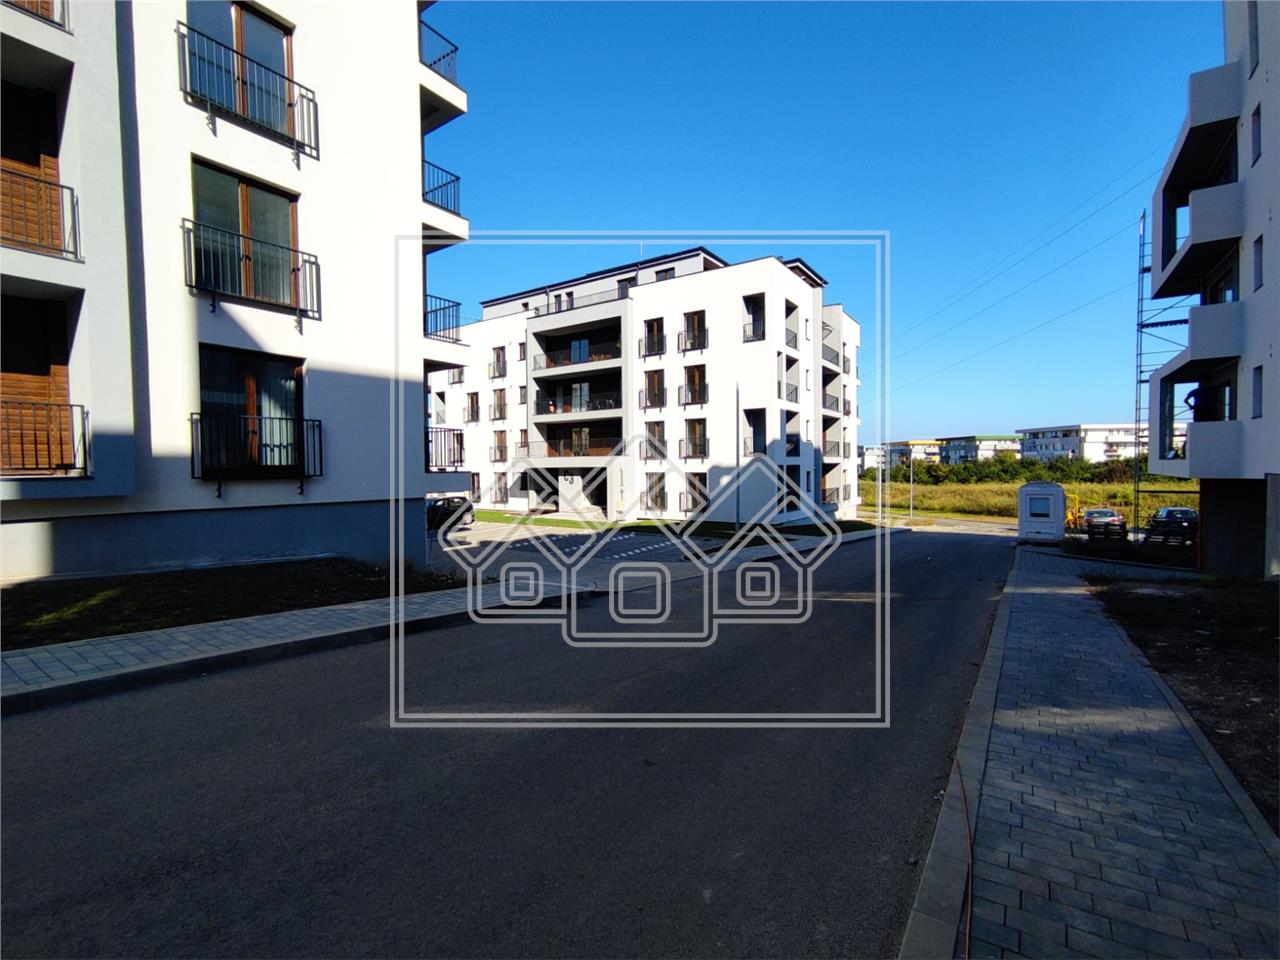 Apartment for sale in Sibiu - 2 balconies - storage room and parking